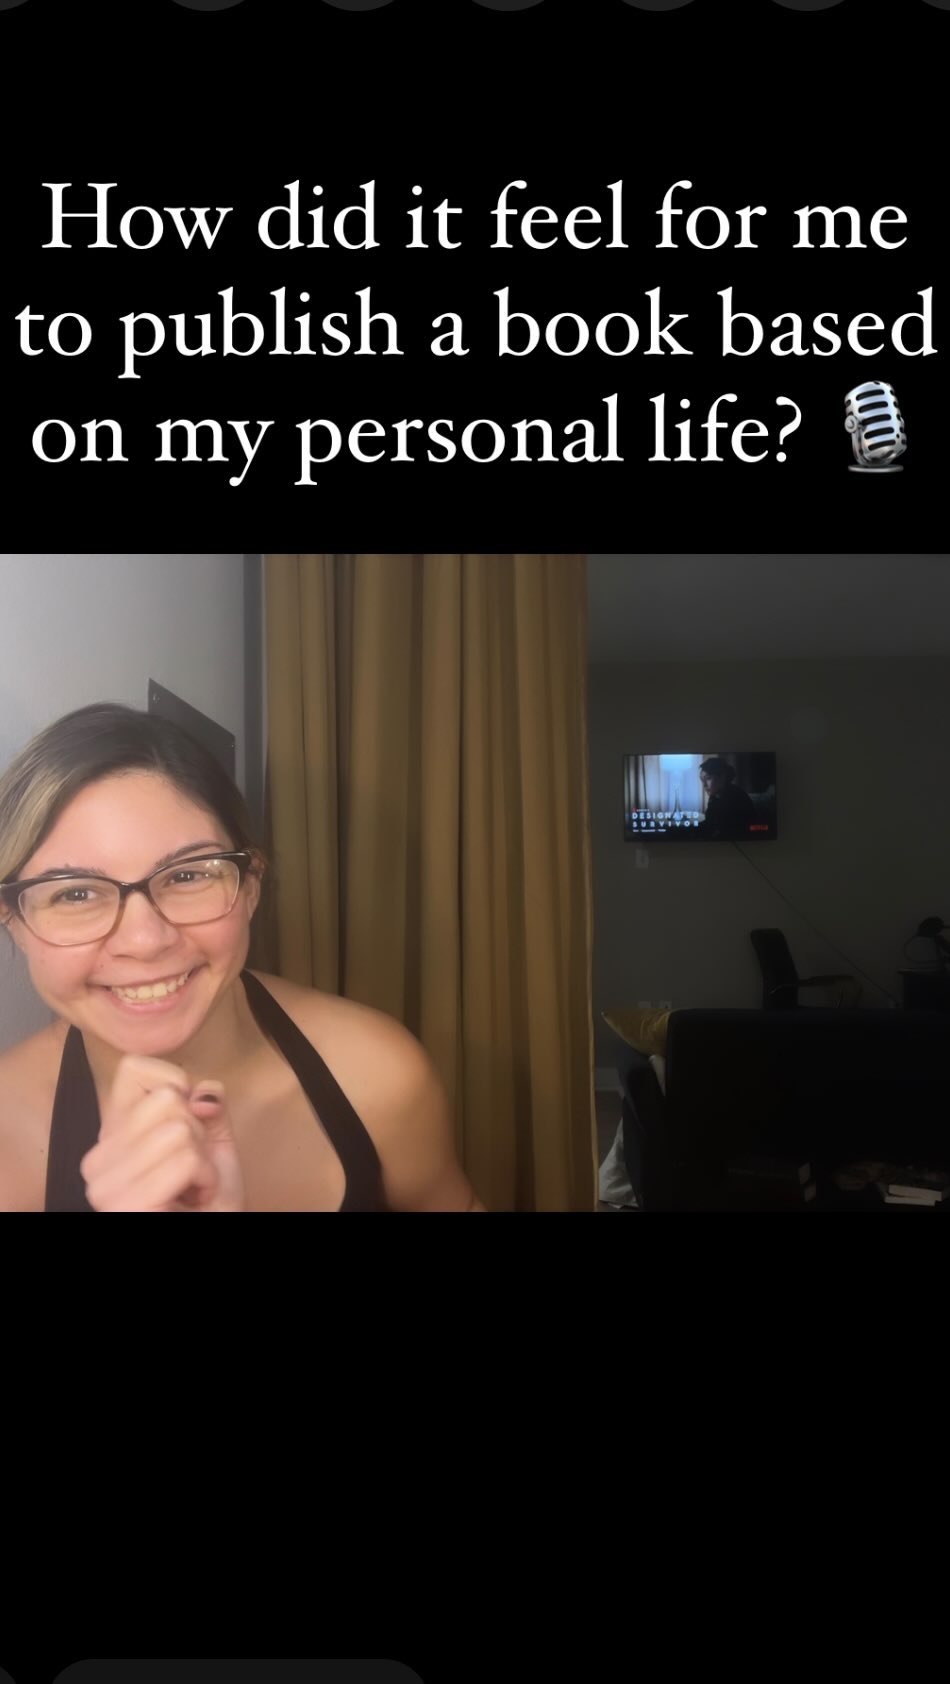 In this video, I discuss what it was like to write and publish a story based on true, very personal events from my life. 
 
As mentioned, while the story is a fantasy, my main character's thoughts and journey mirrors my own. Although the topics in the story were difficult for me to write about, there were times I had a hard time letting certain things out of my heart and onto the page, it felt natural and necessary for me to get it out and share it with an audience. 
 
There is power in allowing oneself to be seen, especially with the critical eyes that are waiting to pick apart stories like Falling Into Fire, stories that deal with sexuality and inner turmoil. My story was never meant to be kept within the confines of my own mind or within the perceptions of the few who had a glimpse into my experiences. 
 
This book may not be long in length, in some ways I see it as more of an introduction and conversation starter than a story that stands on its own, but it is my story. And I am happy to share it publicly and use it as a jump-off point from which to have some of these important discussions. 

Thank you for watching! ❤️
 
If you have any questions for me regarding the story or my process, about my experience or writing in general, feel free to ask them in the comment section below. ⤵️ 
 
#kristinasmeriglio #fallingintofire #author #book #faq #sexuality #identity #sa #trauma #healing #writing #art #communication #story #fantasy #fiction #books #bookstagram #writer